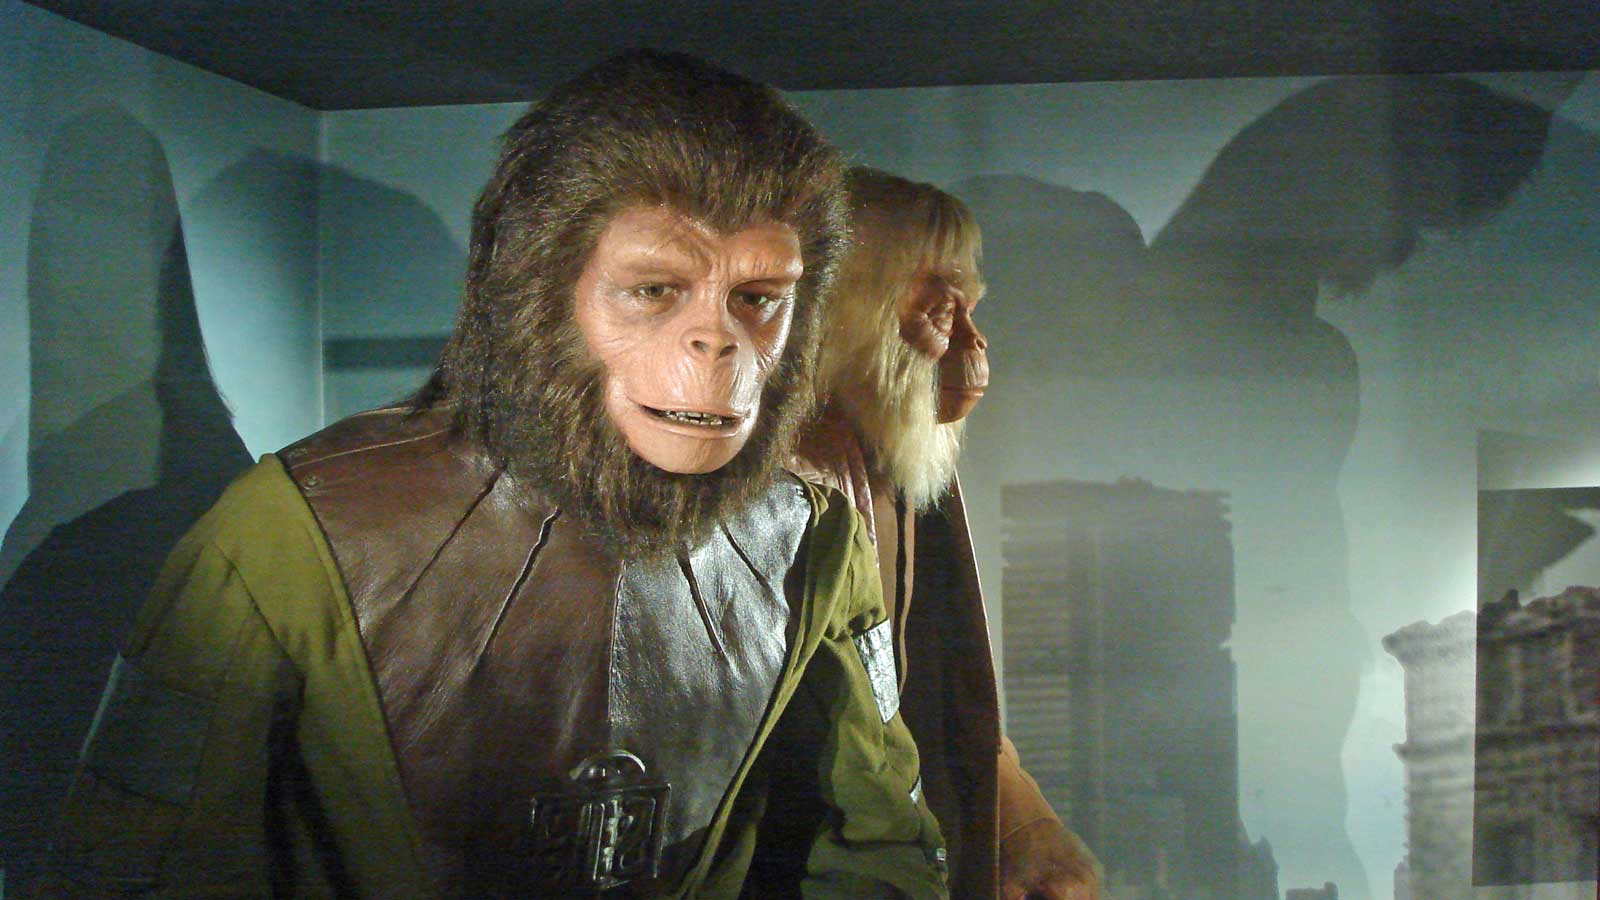 A humanoid monkey costume from Planet of the Apes